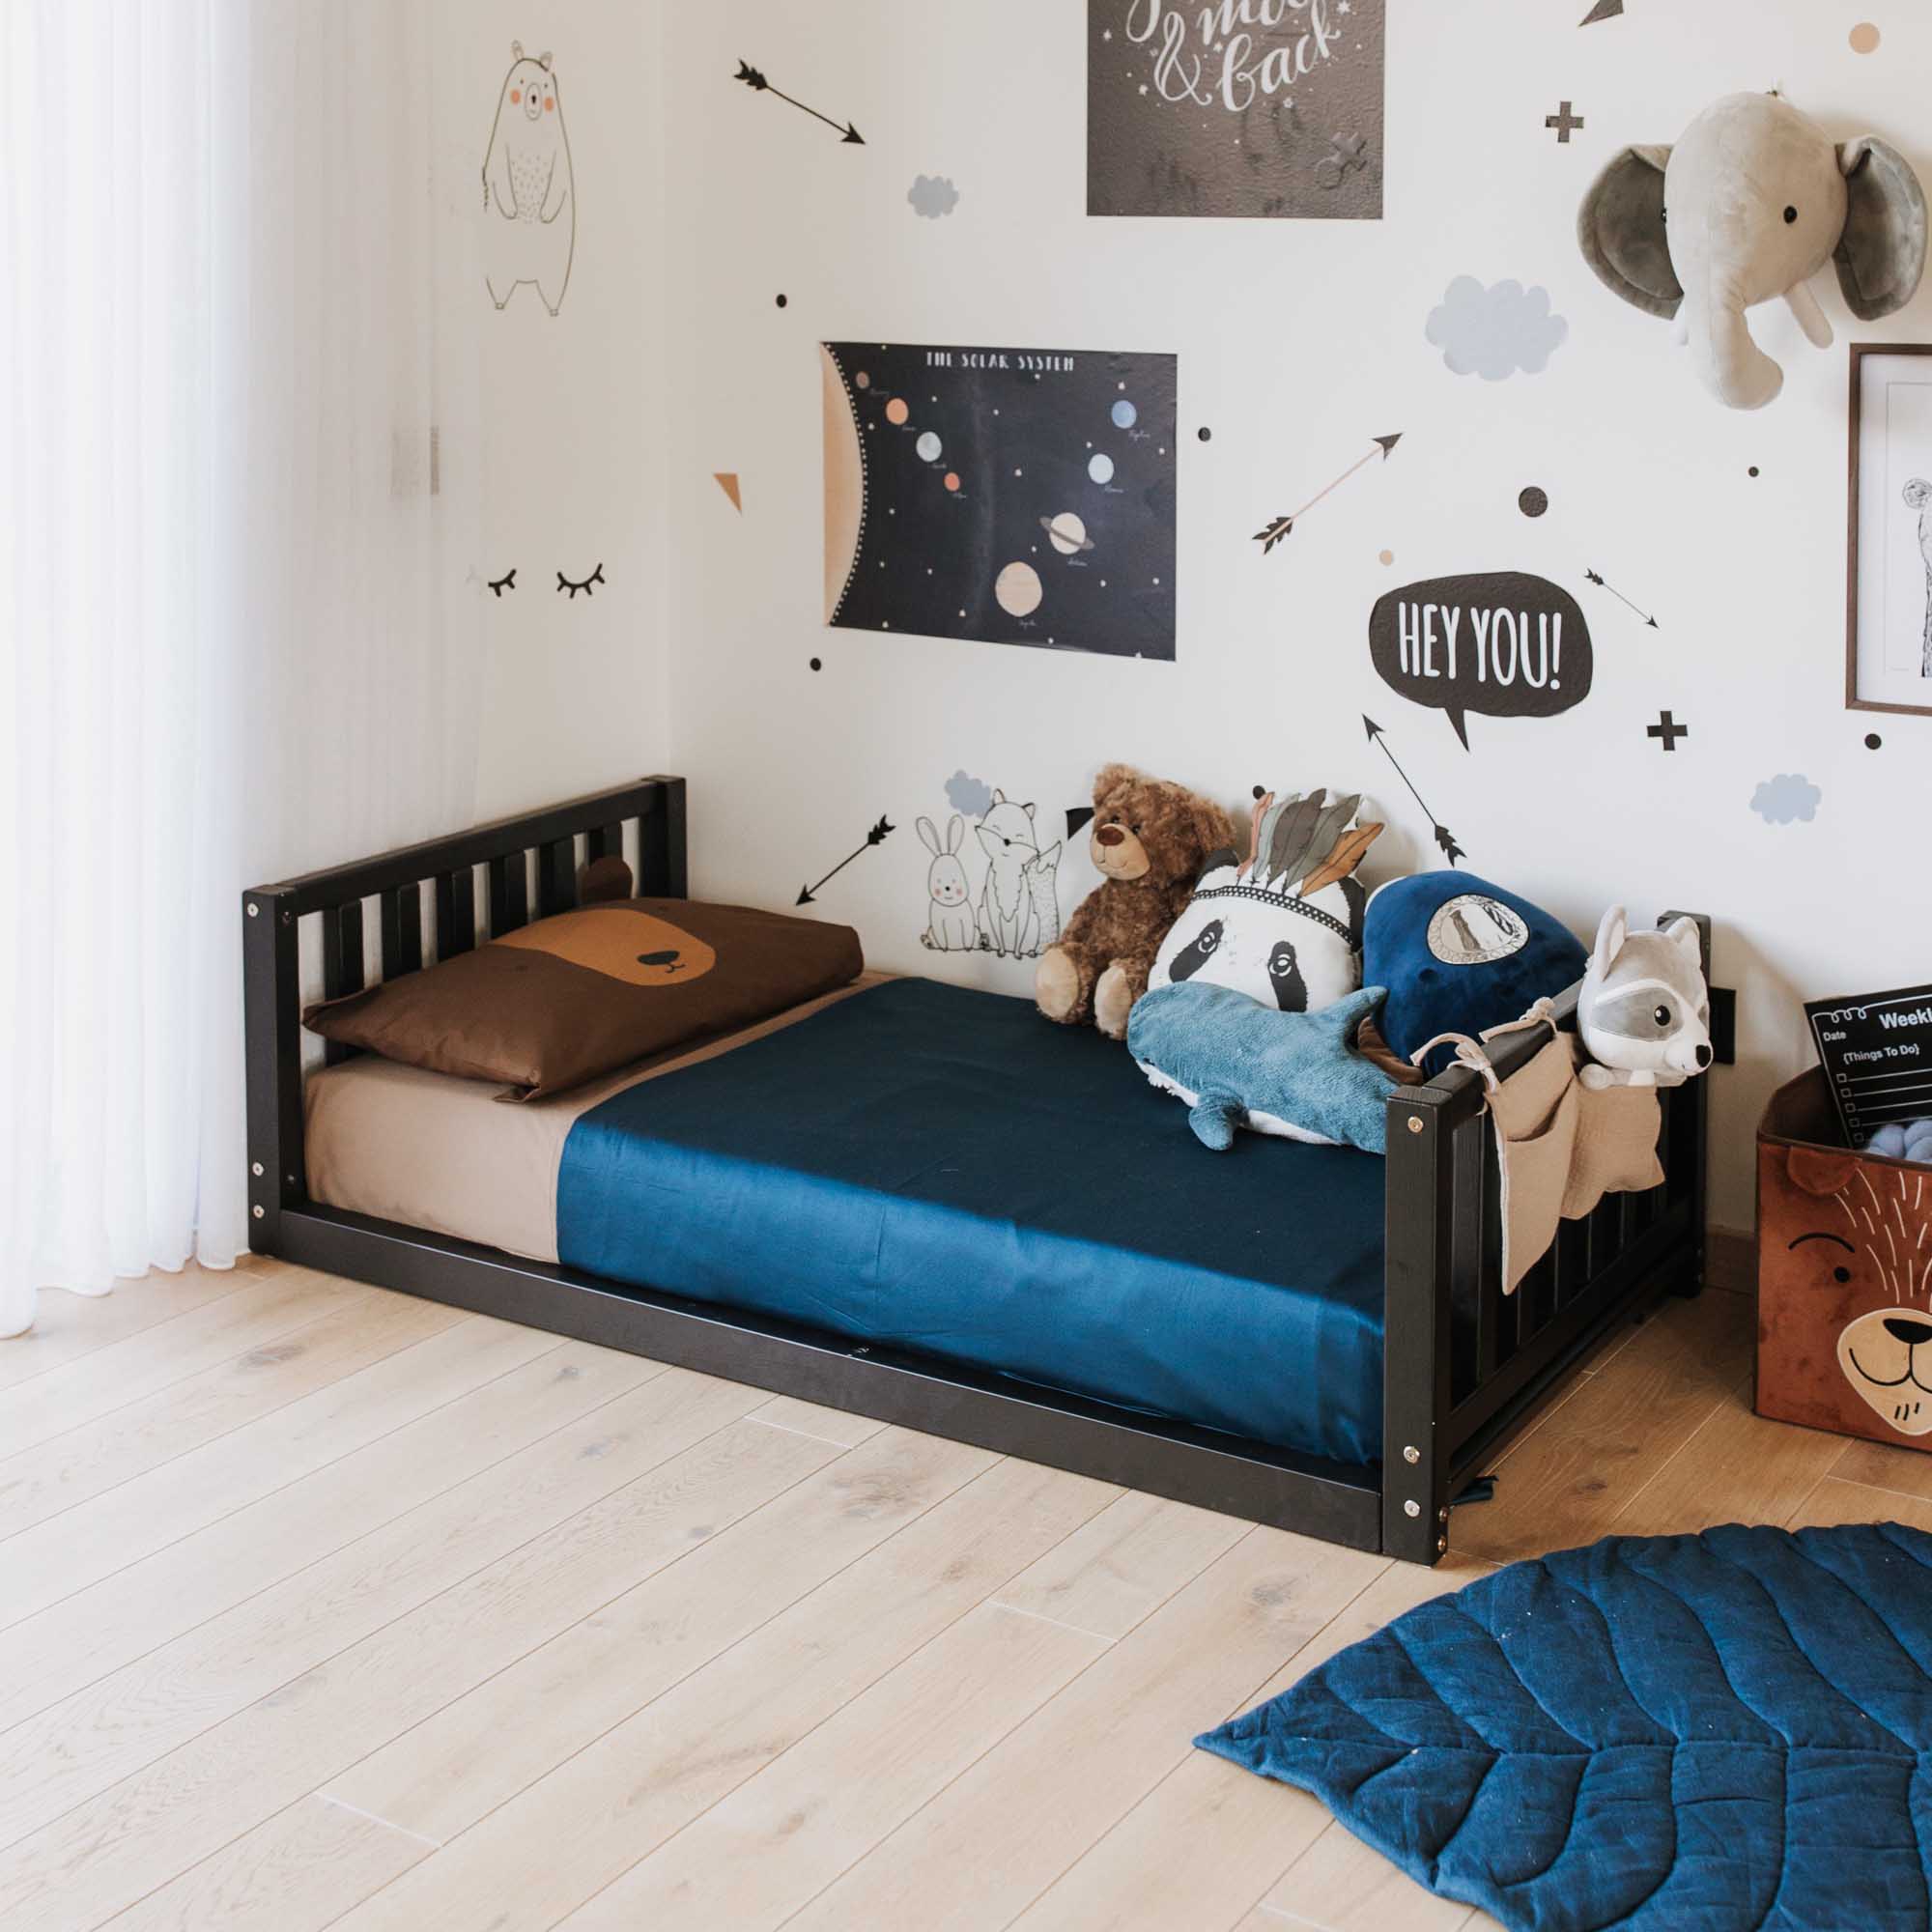 A child's room with a bed, toys, and wall decals.